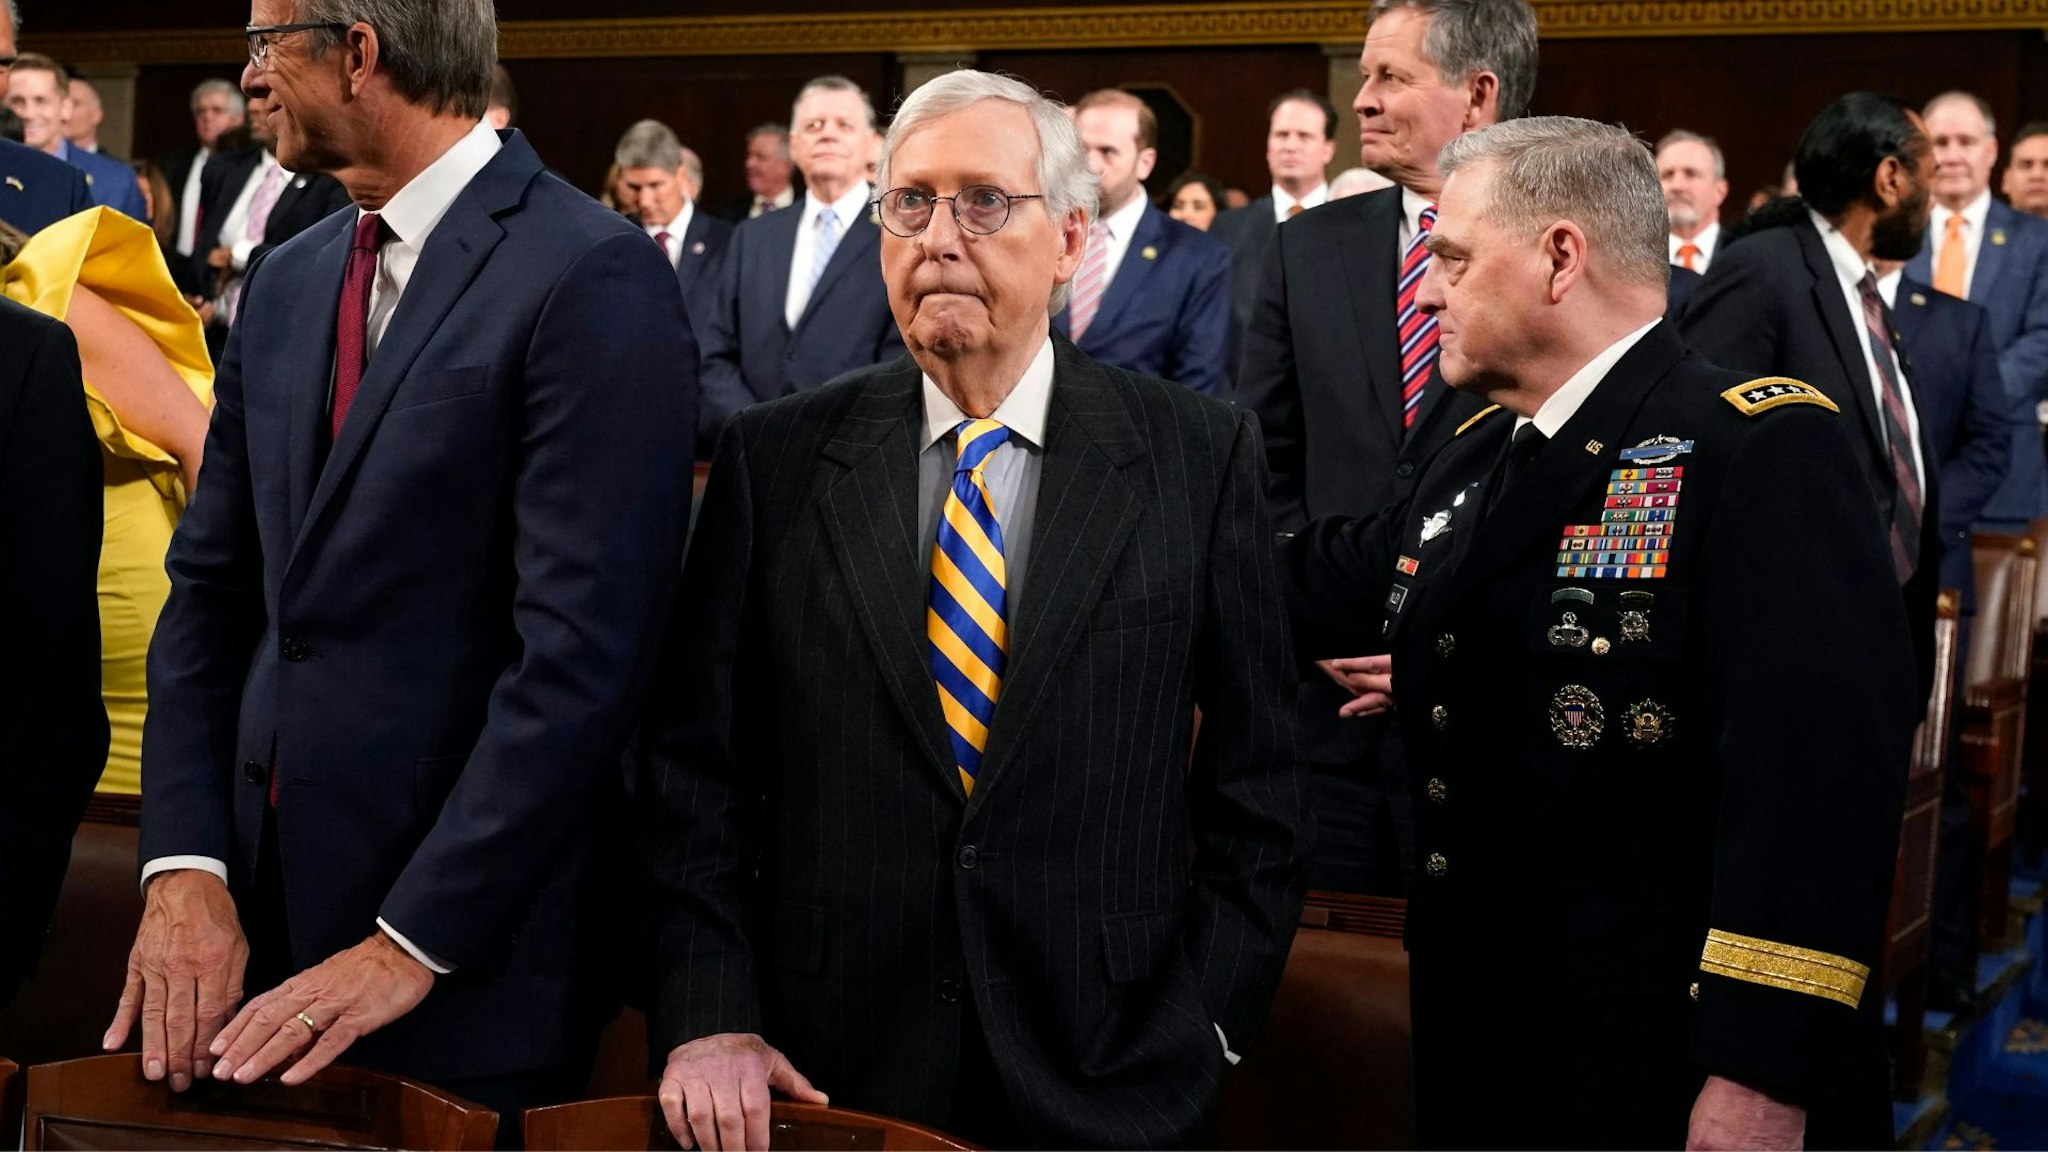 Senate Minority Leader Mitch McConnell (R-KY), arrives with Chairman of the Joint Chiefs of Staff General Mark Milley (R) before President Joe Biden delivers the State of the Union address in the House Chamber of the US Capitol in Washington, DC, on February 7, 2023.